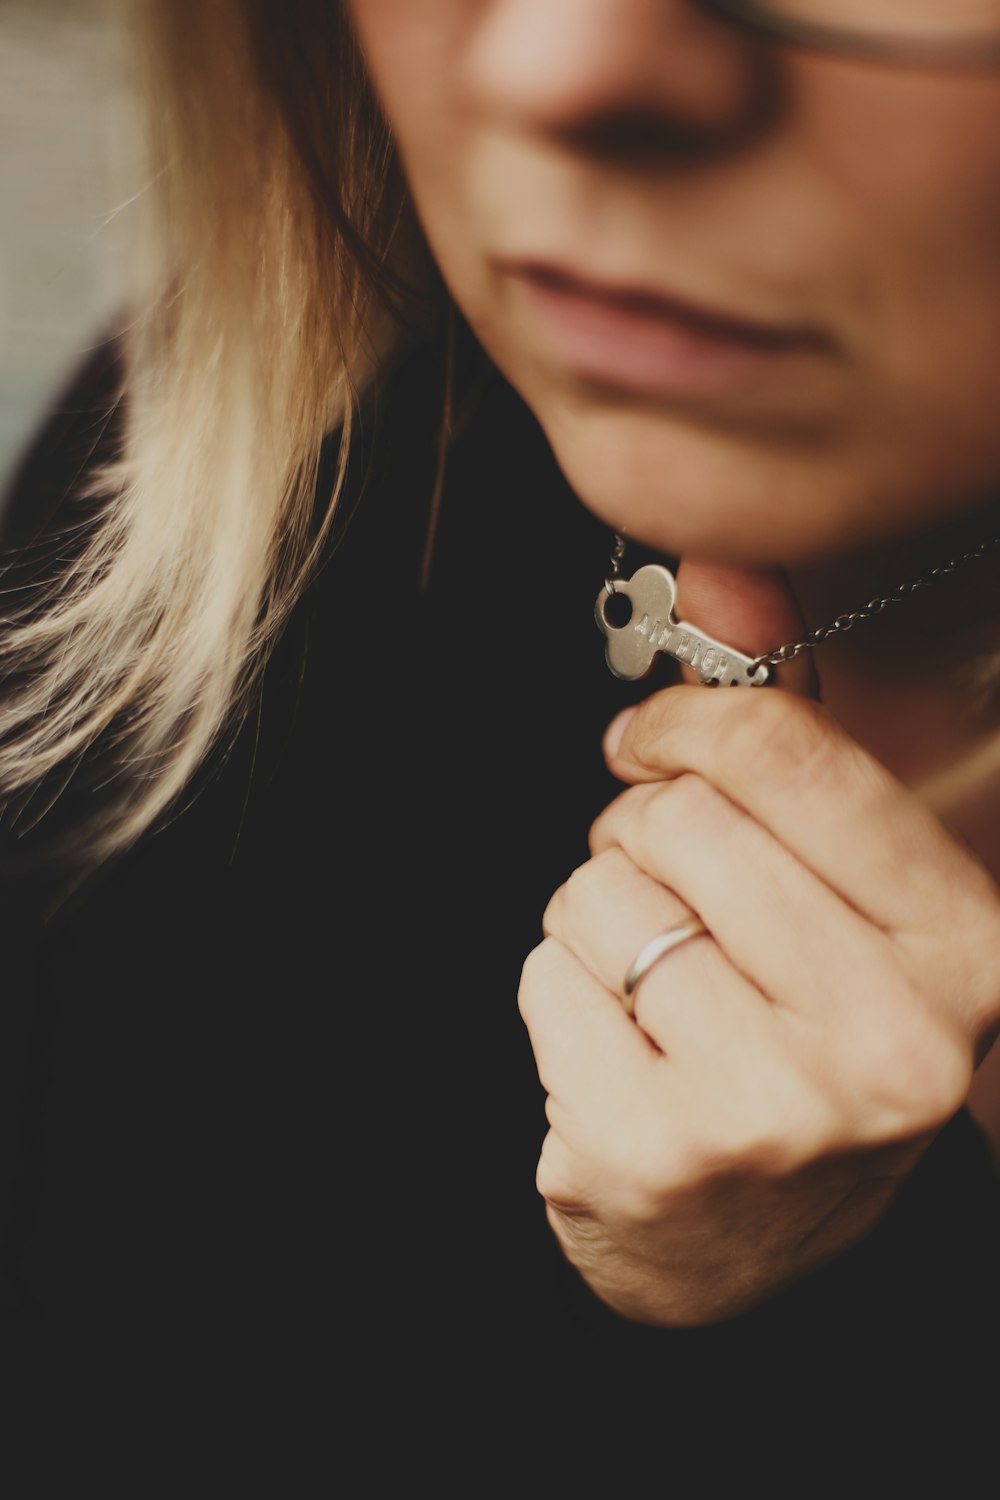 woman in black top holding silver-colored necklace